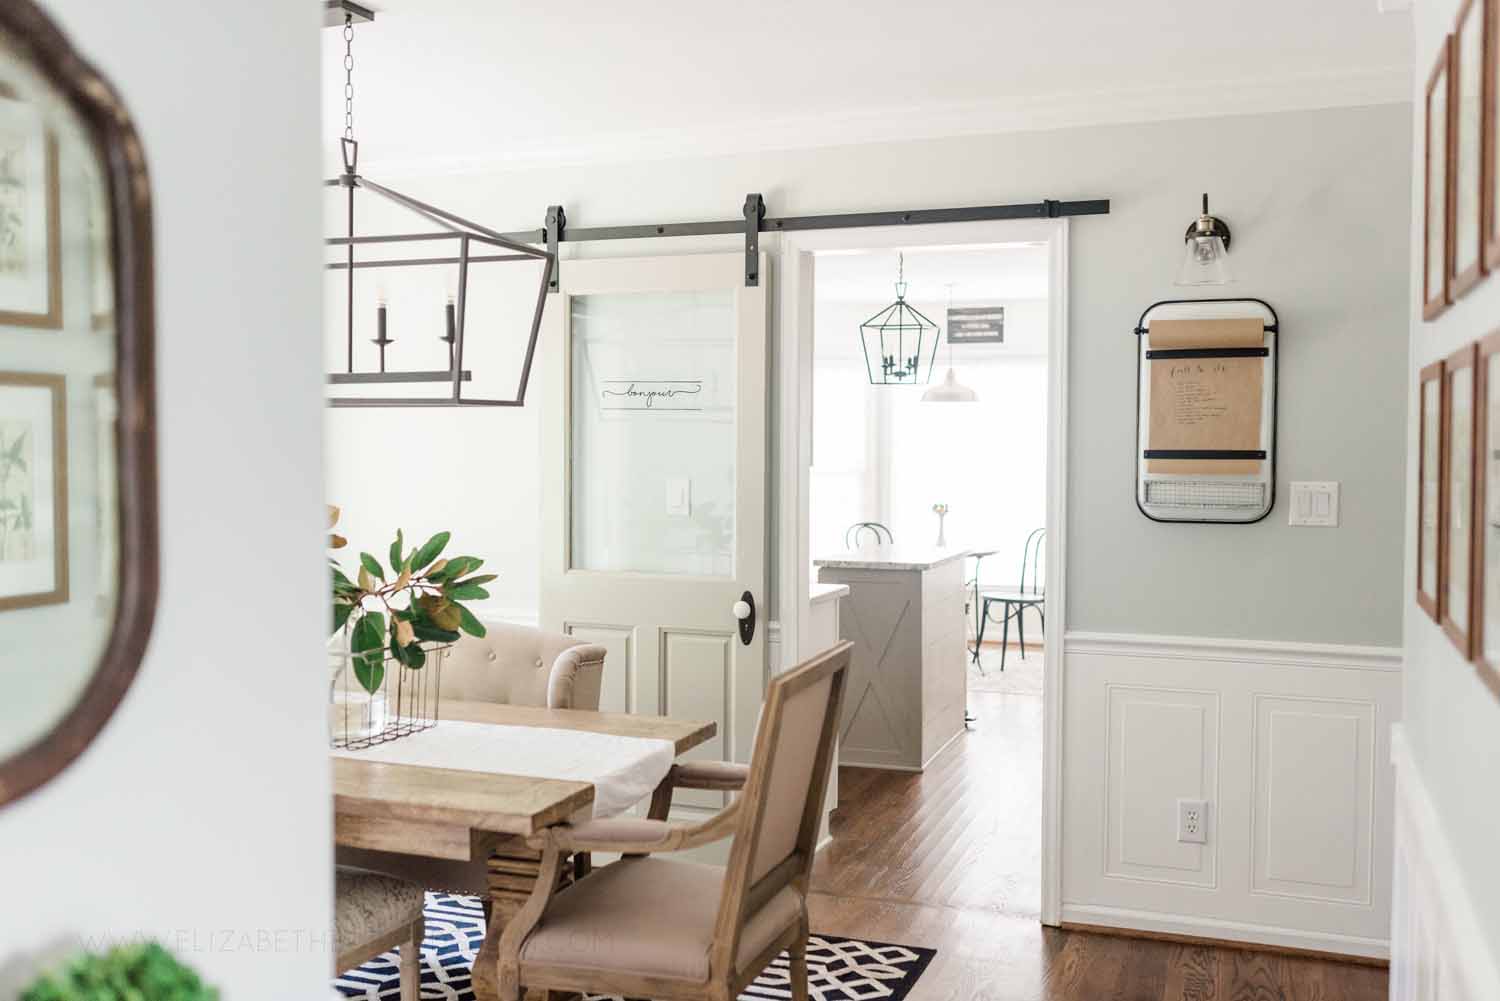 Elizabeth Burns Design Raleigh Interior Designer 1990s house remodel before and after Sherwin Williams Silver Strand SW 7057 Farmhouse Dining Room Barn Door Budget Renovation (4).jpg